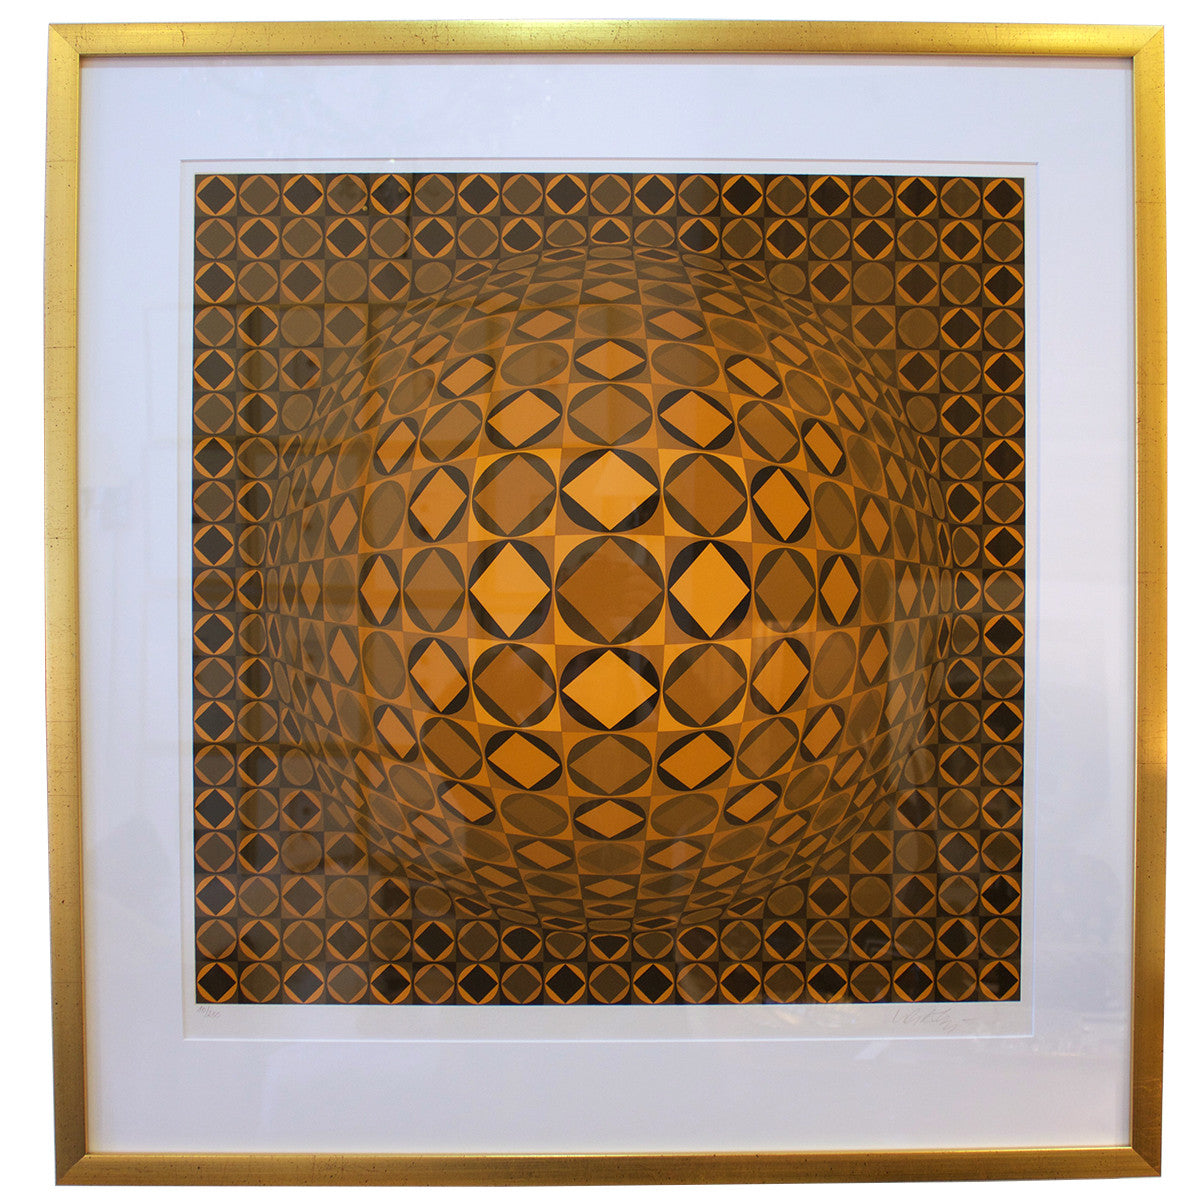 Framed Victor Vasarely Optical Art Lithograph